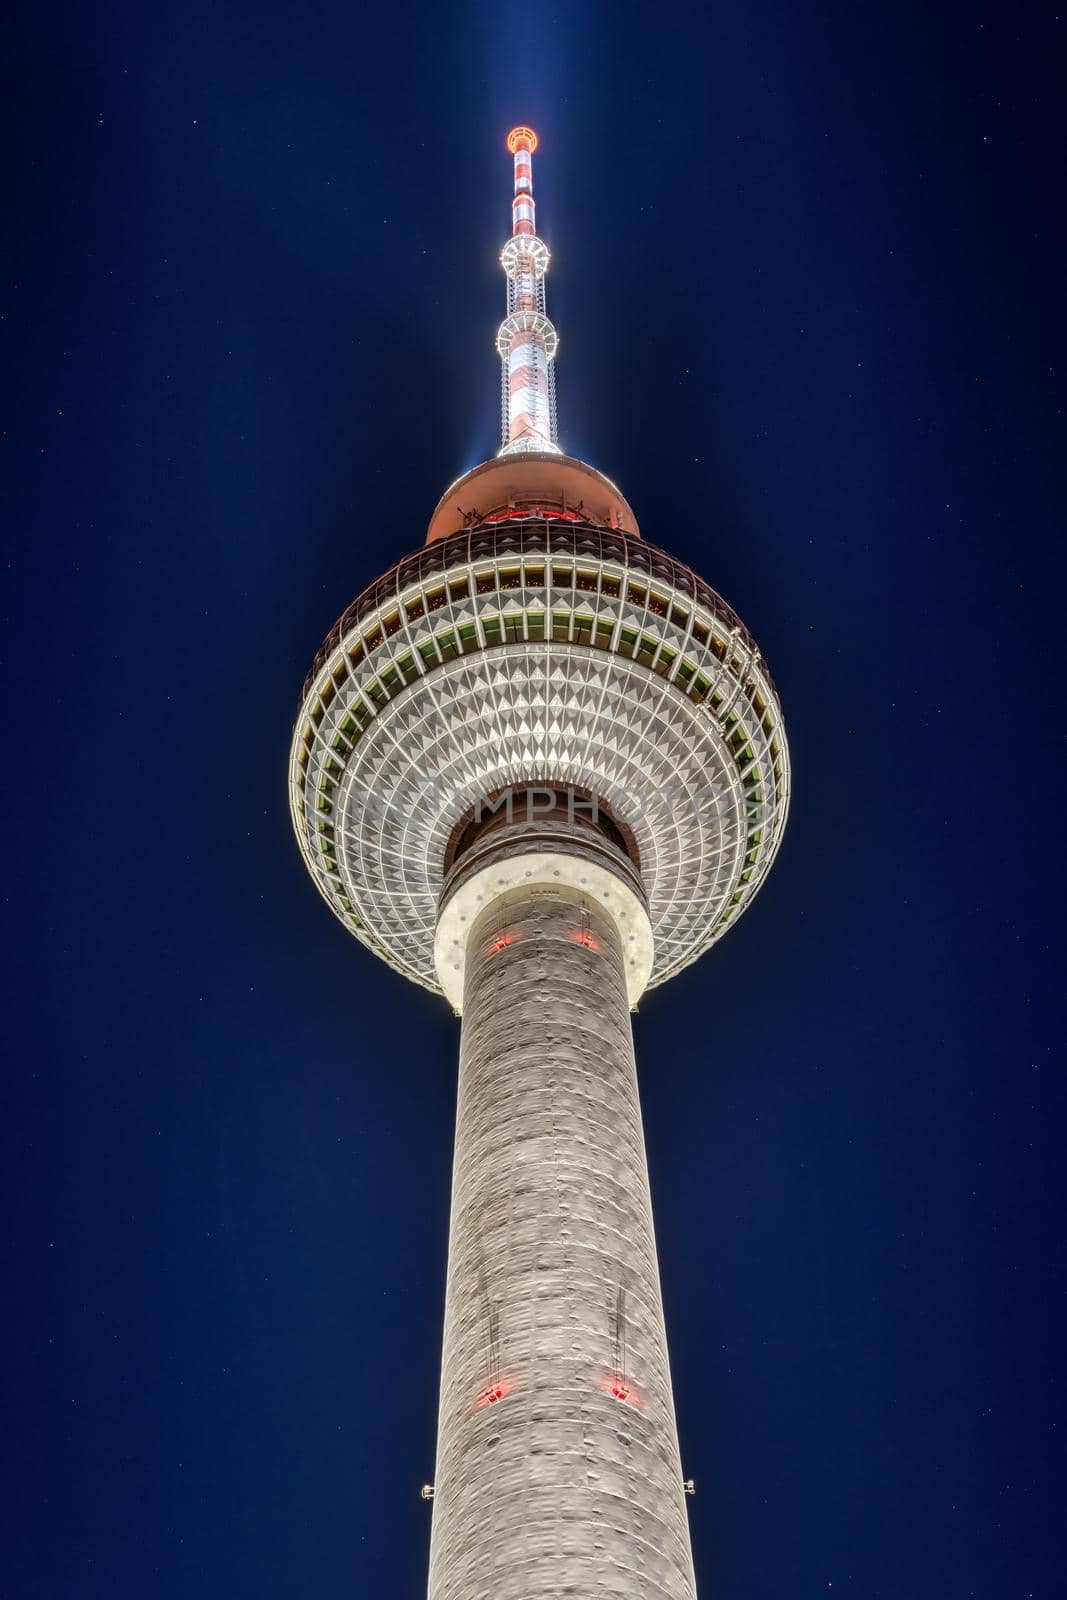 The famous Television Tower in Berlin at night by elxeneize